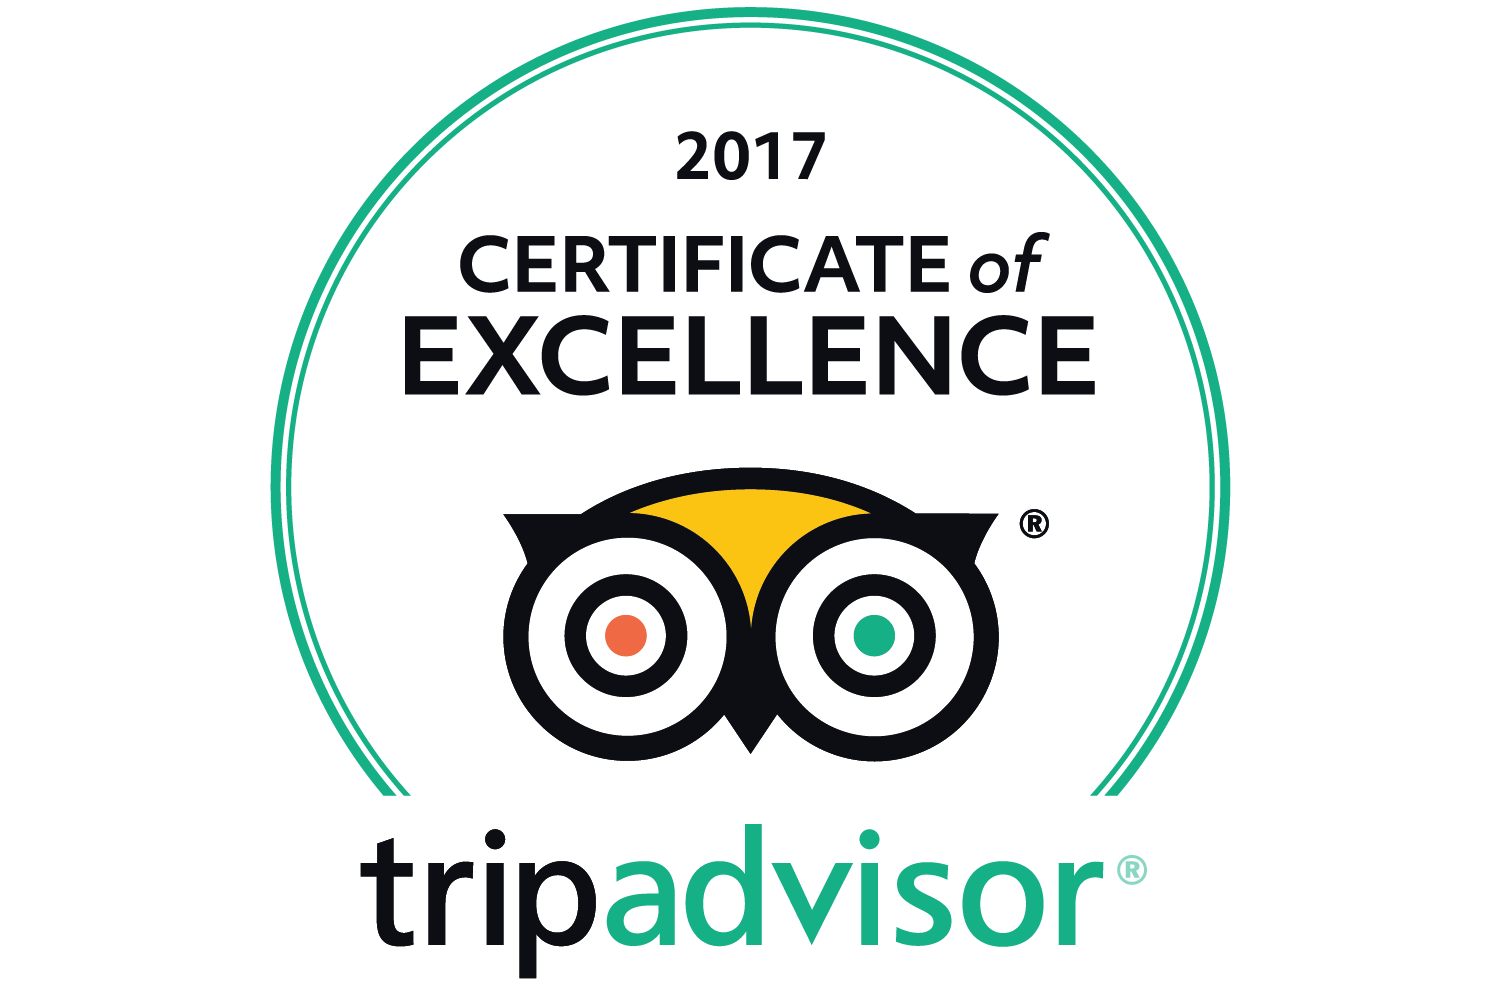 Trip advisor 2017 certificate of excellence